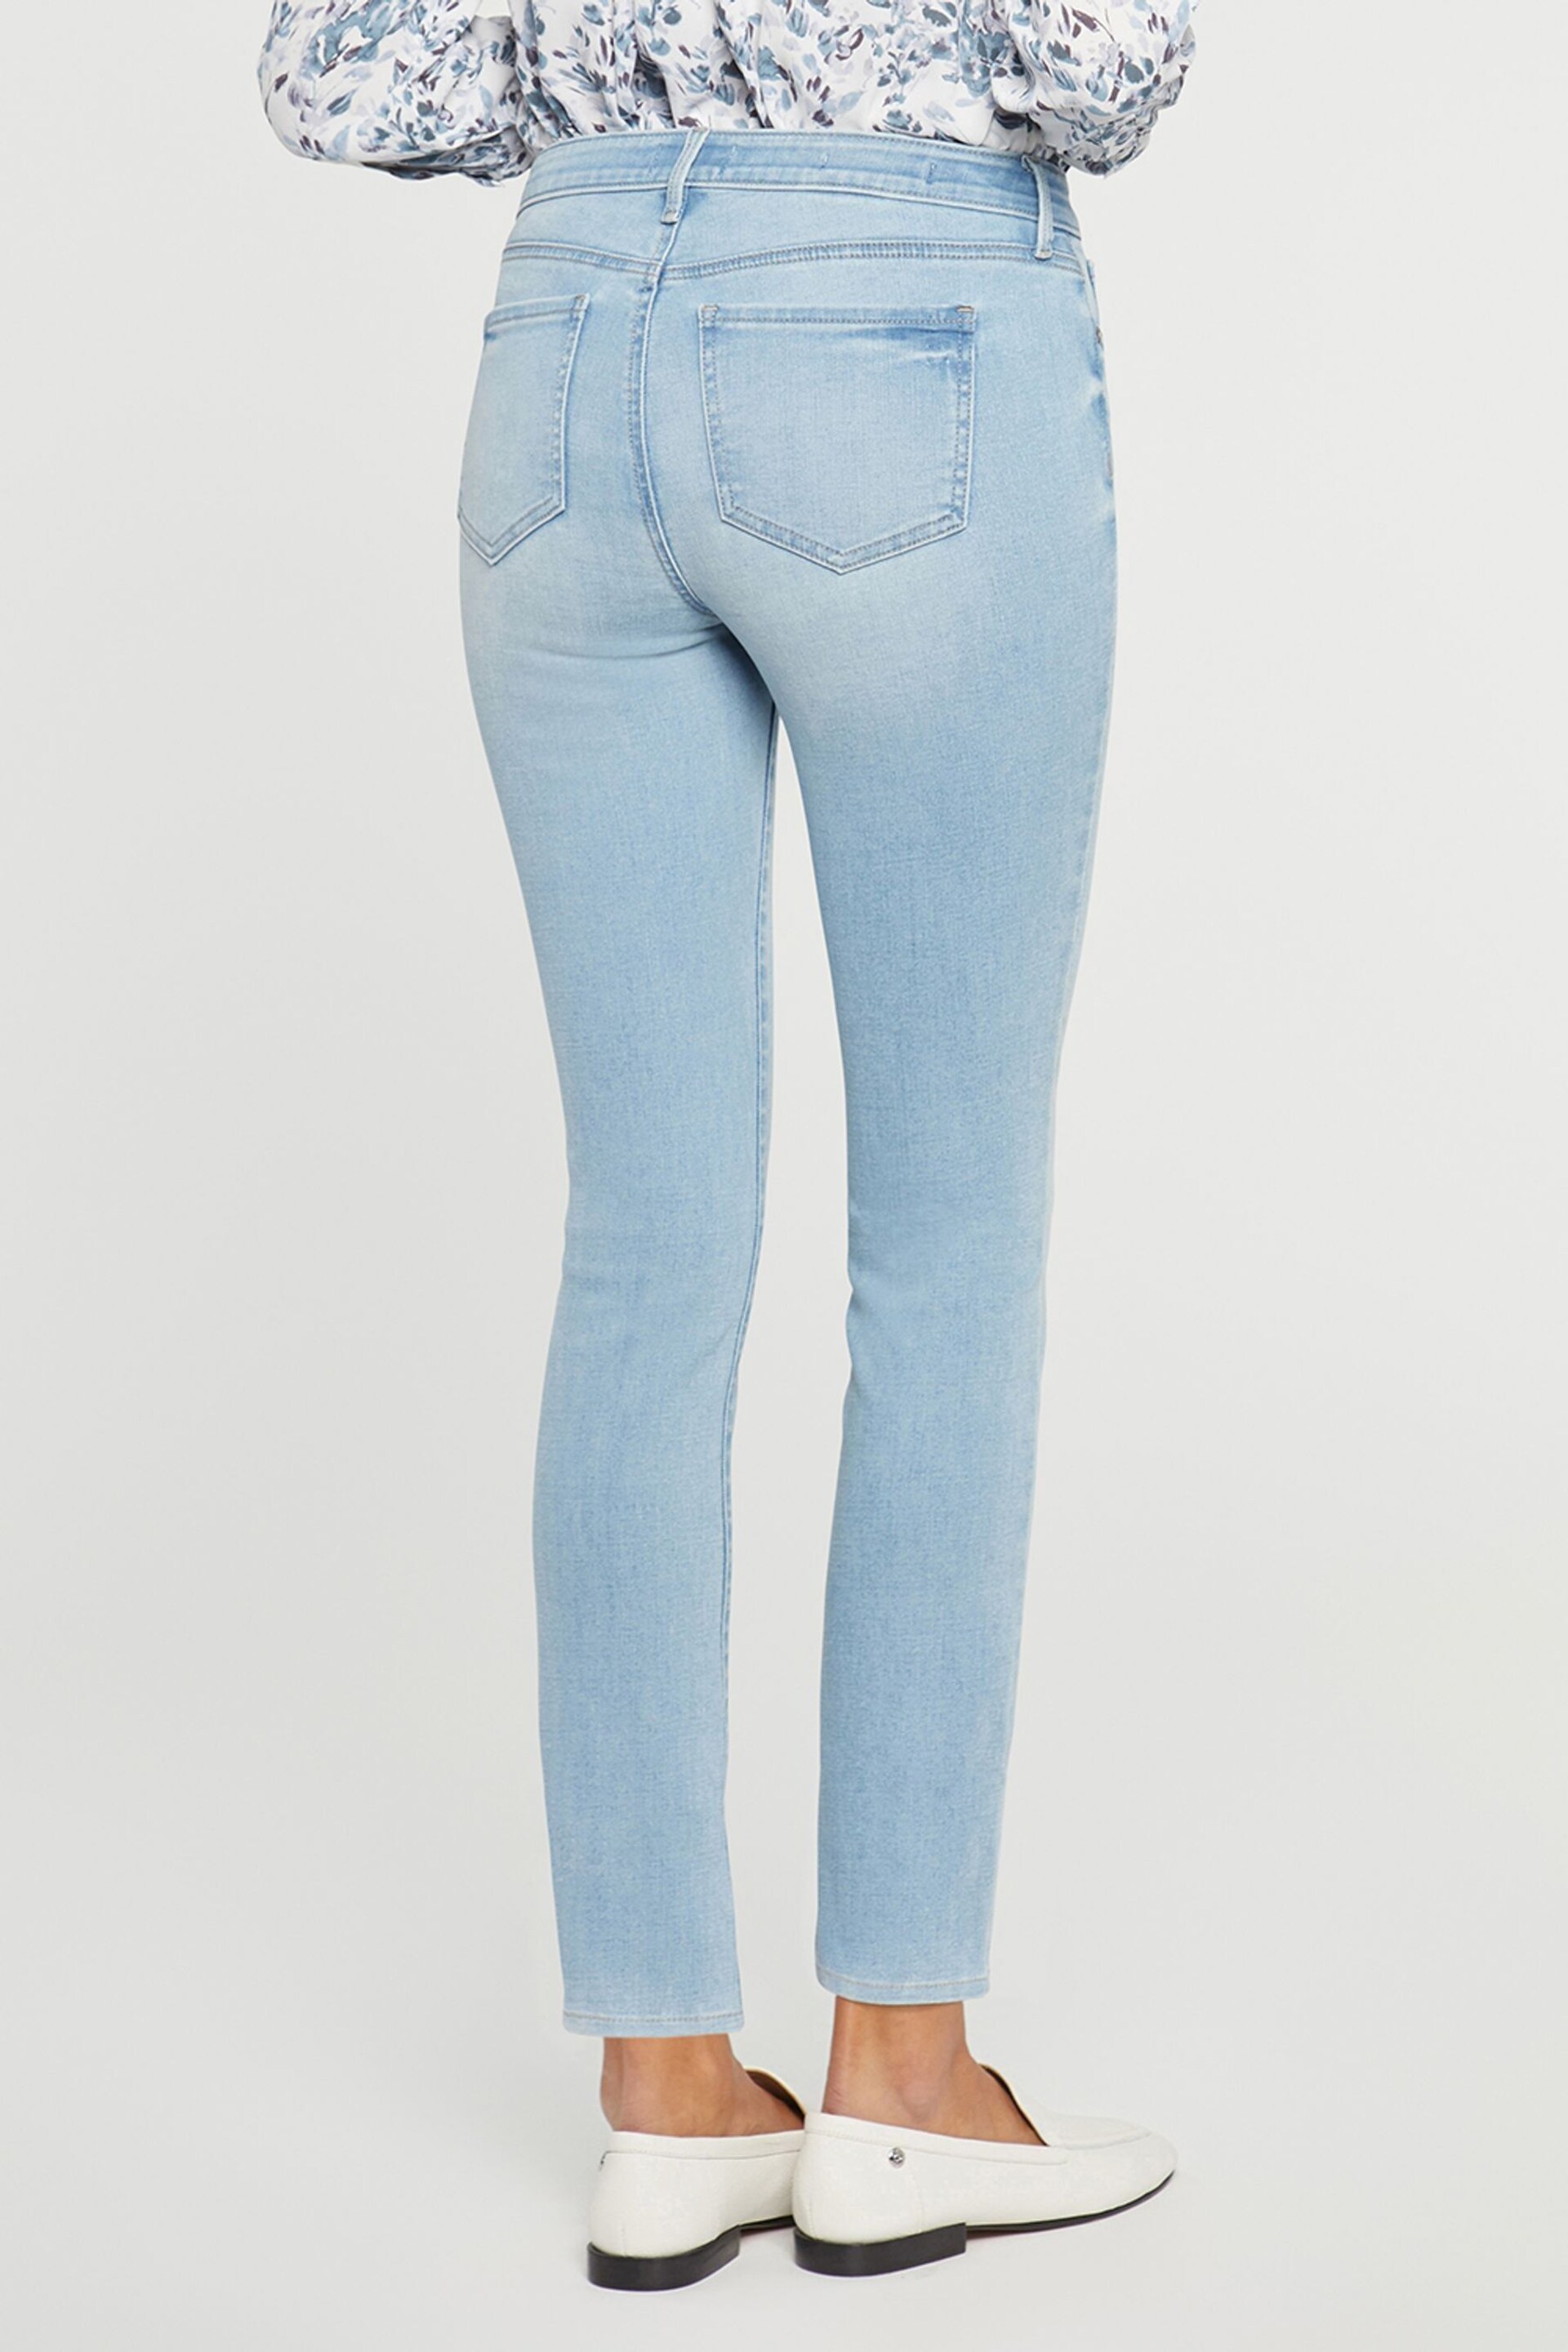 NYDJ Blue Alina Ankle Jeans - Image 2 of 3